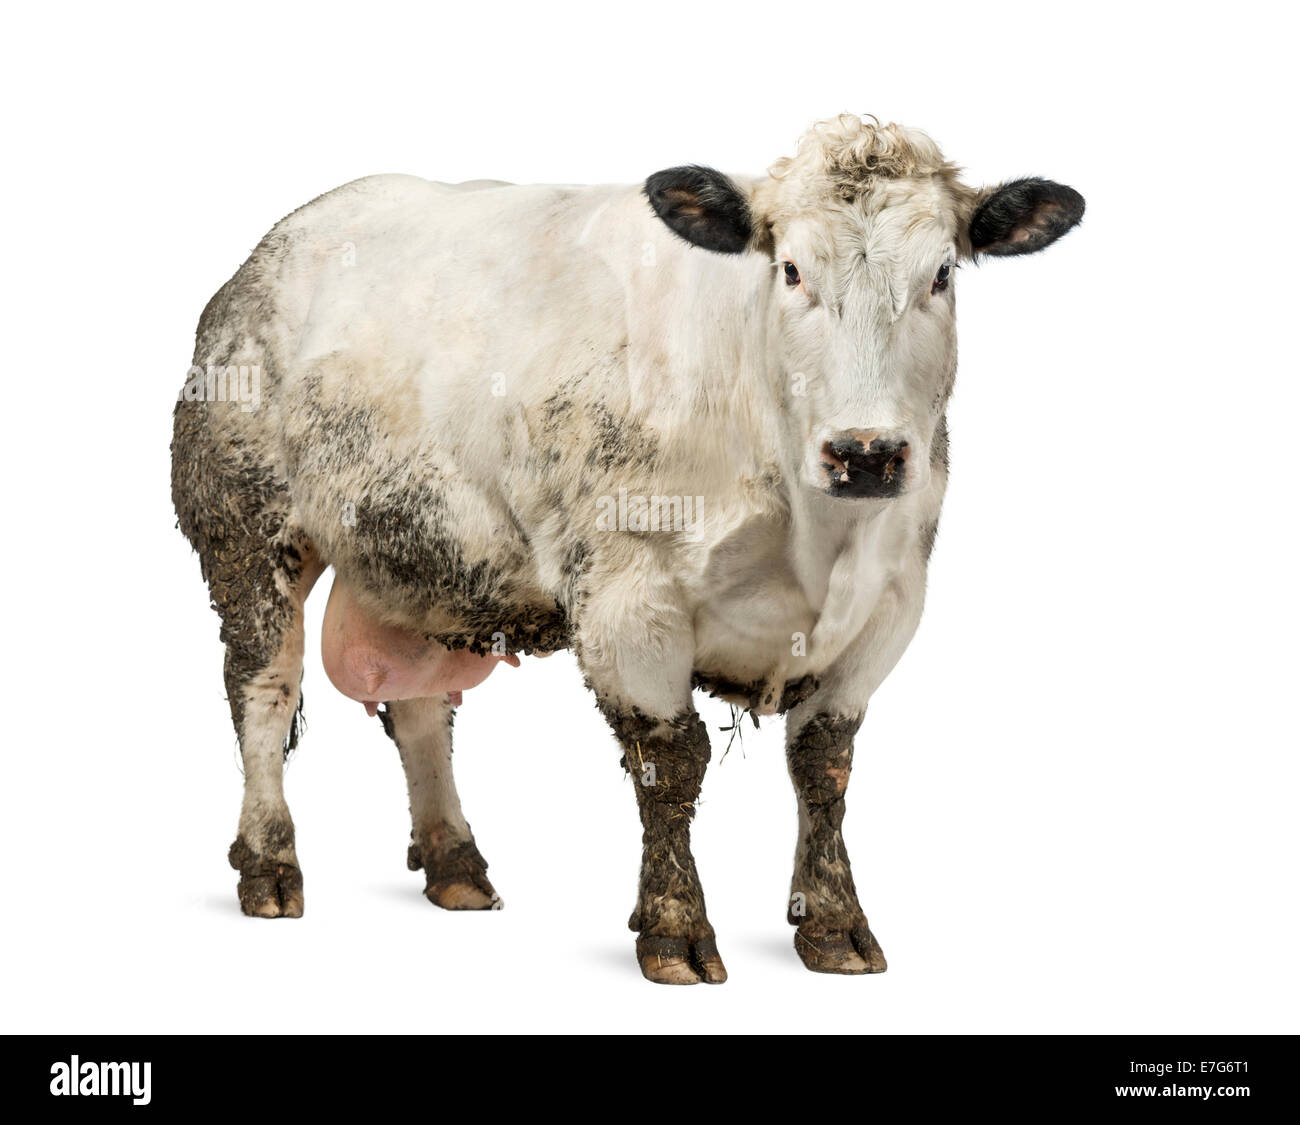 Enceintes sale bleu belge cow standing in front of white background Banque D'Images